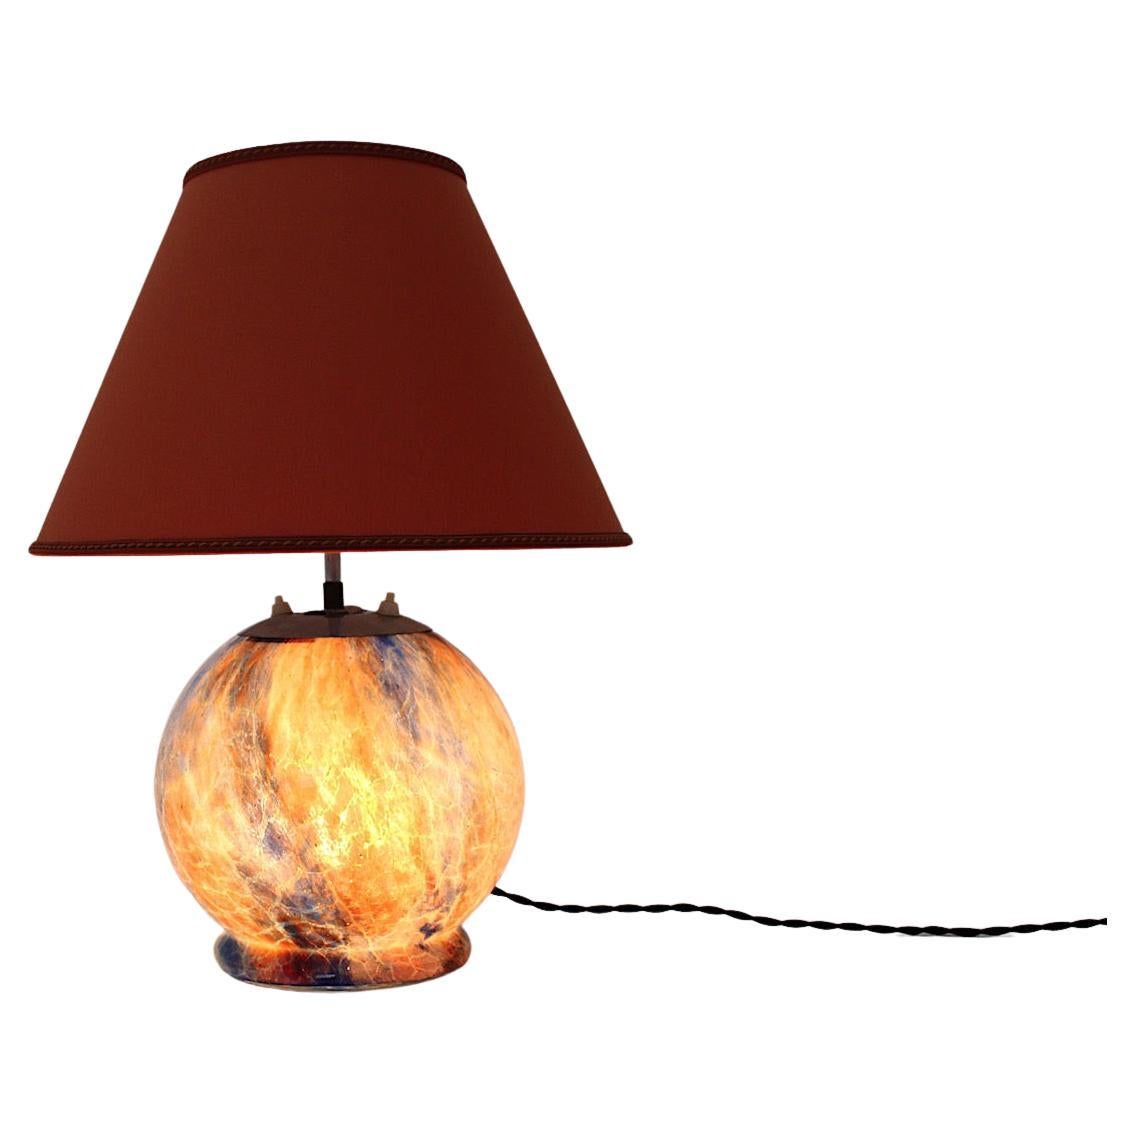 Mid-Century Modern vintage table lamp with glass base ball like and a triangle shape lamp shade in textile fabric 1940s Germany.
The beautiful glass ball with many colors like burnt orange, red, brown and blue is very similar to the glass marbles